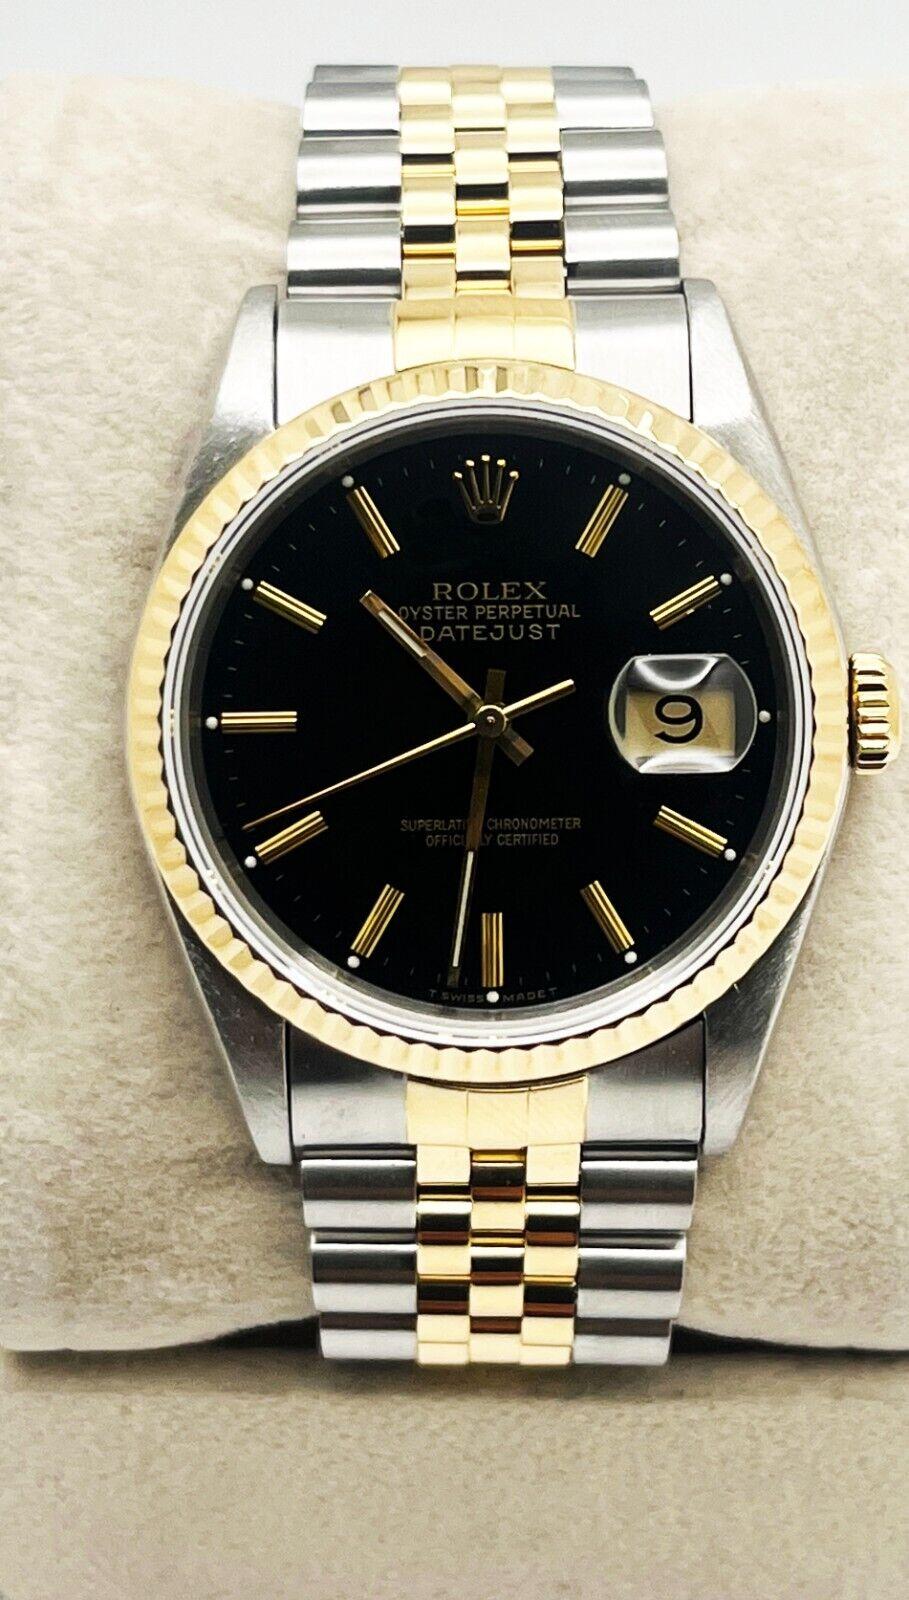 Rolex Datejust 16233 Black Dial 18K Yellow Gold Stainless Steel In Excellent Condition For Sale In San Diego, CA